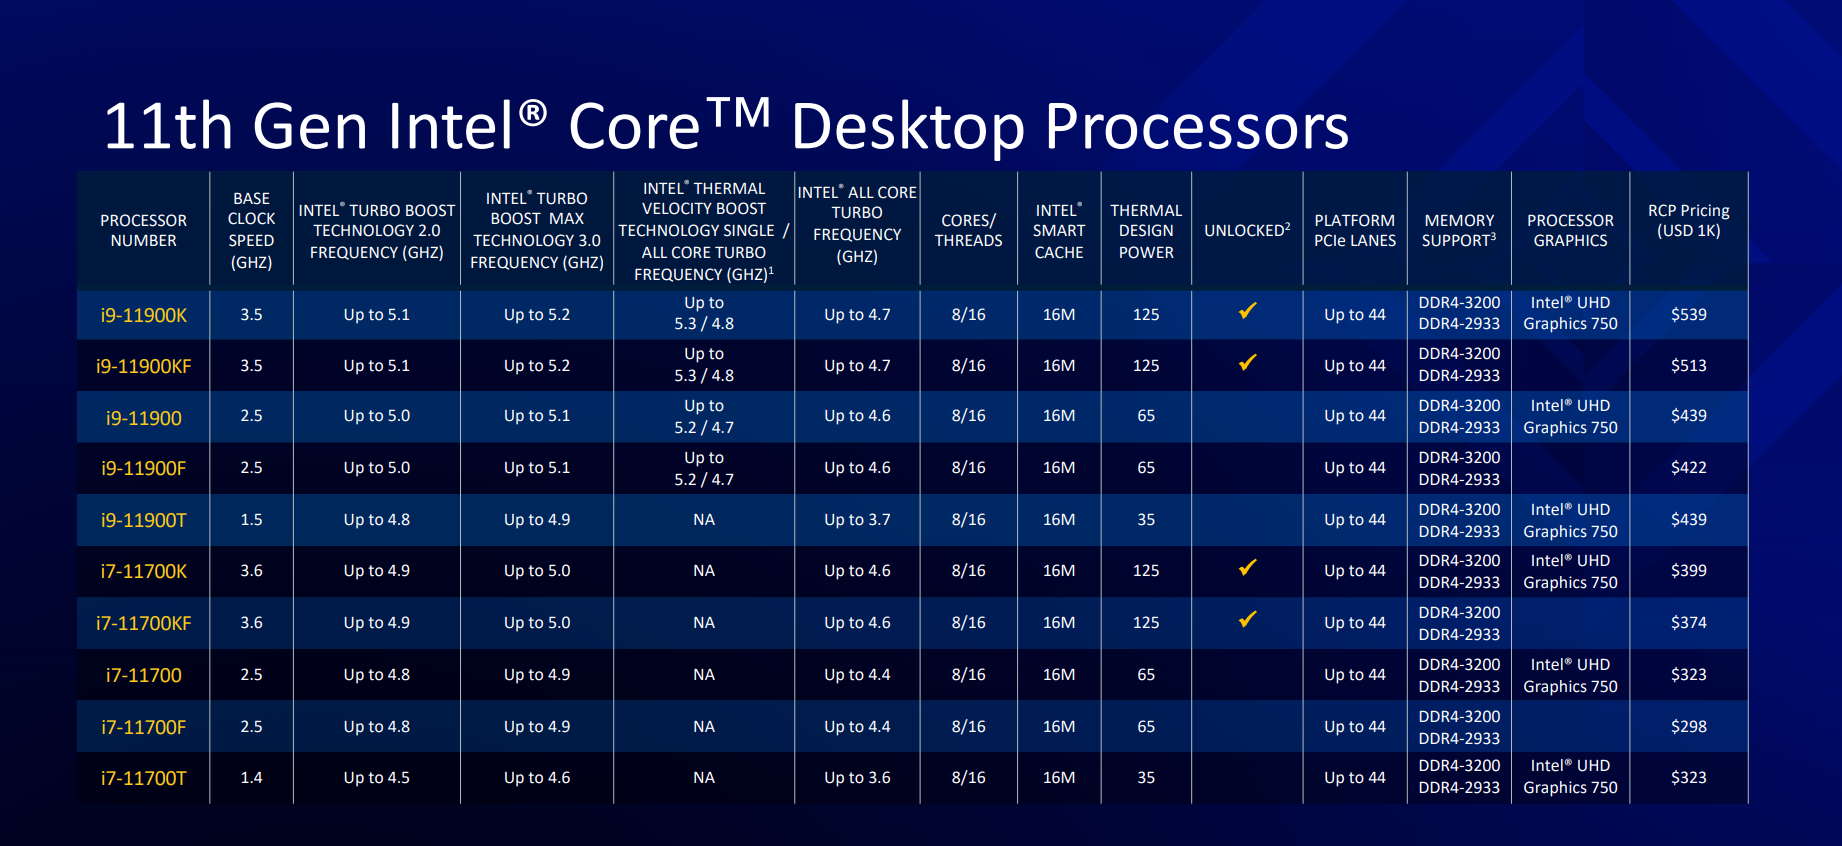 Intel Rocket Lake specifications and pricing